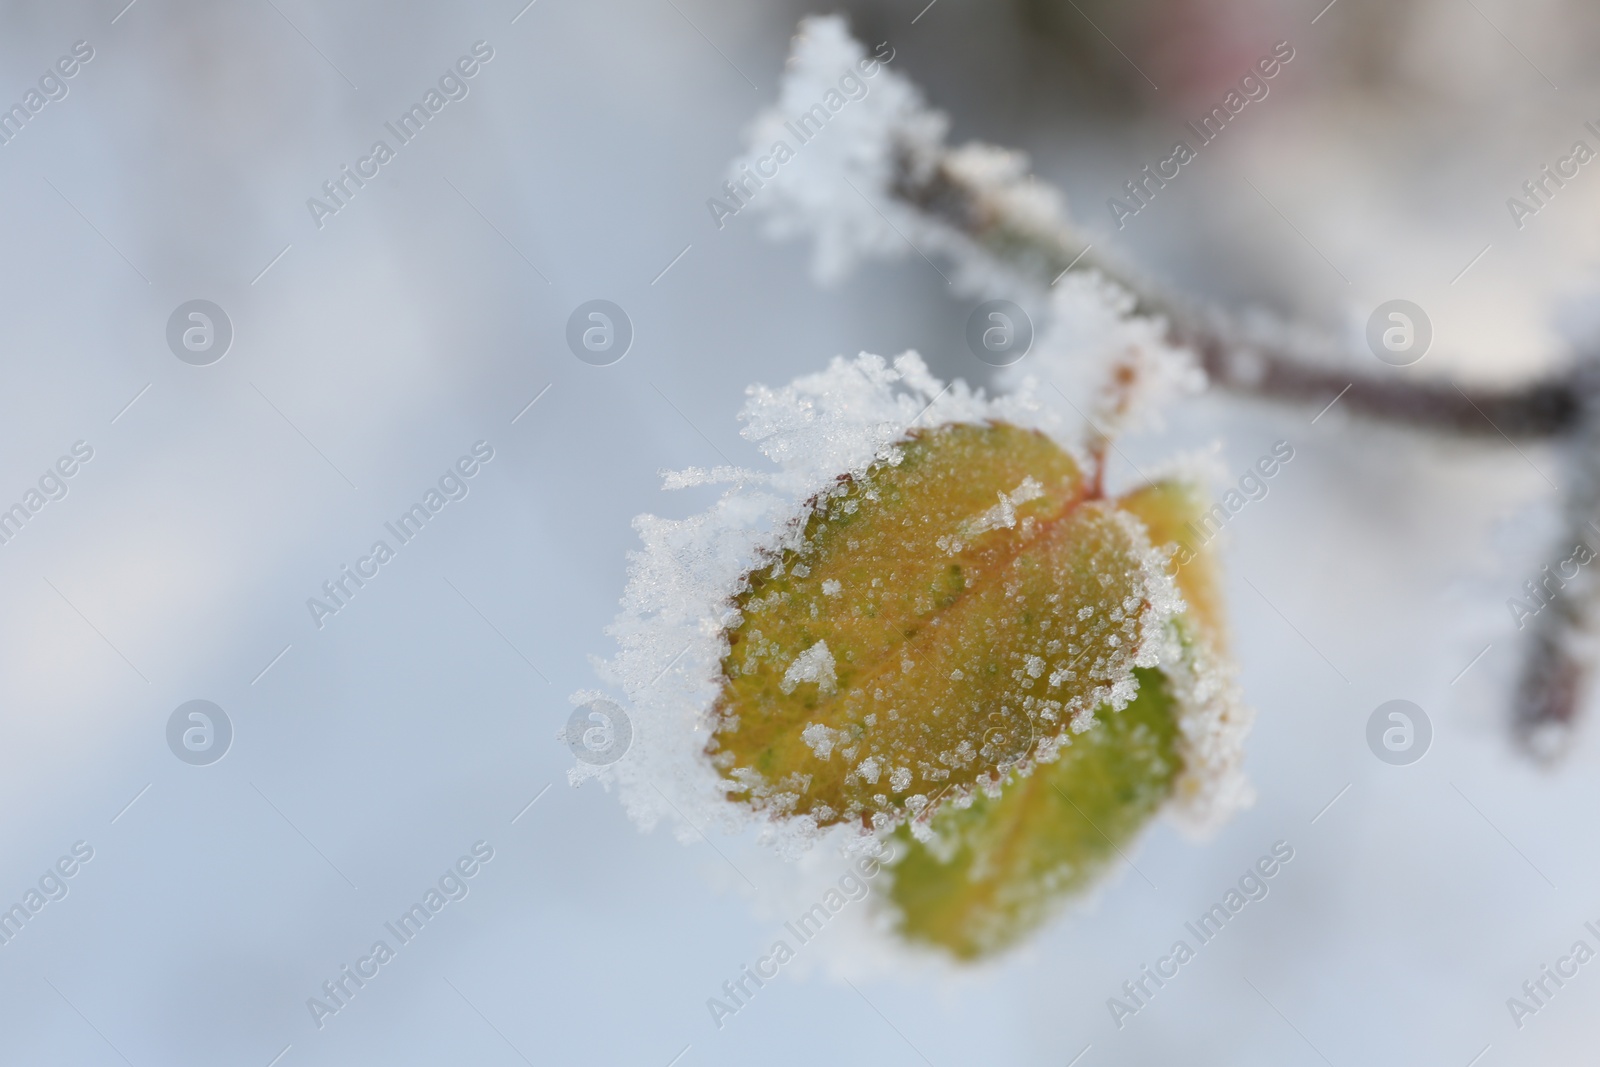 Photo of Frosty leaves on tree branch against blurred background, closeup. Winter season